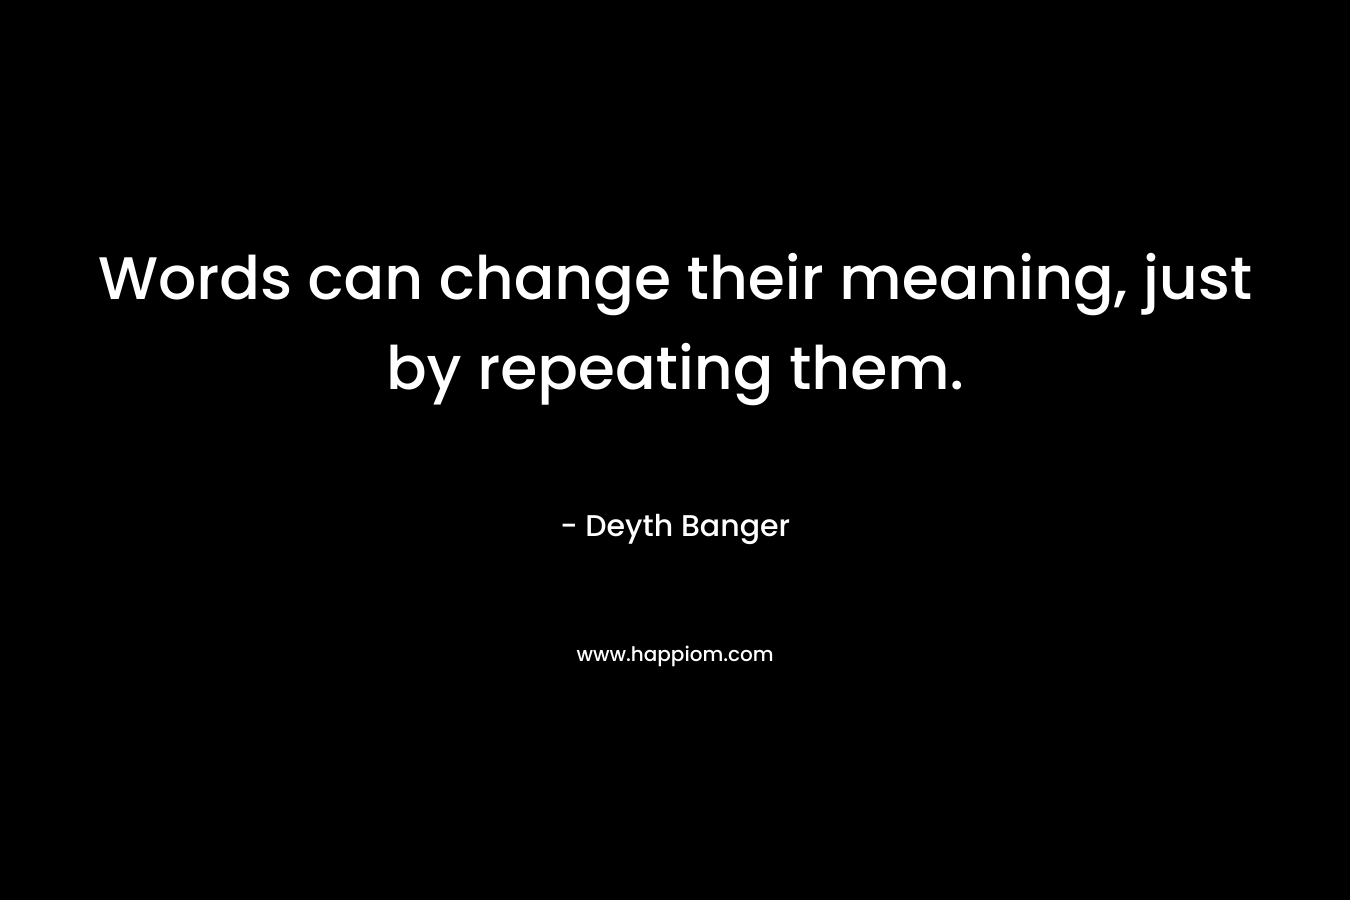 Words can change their meaning, just by repeating them.